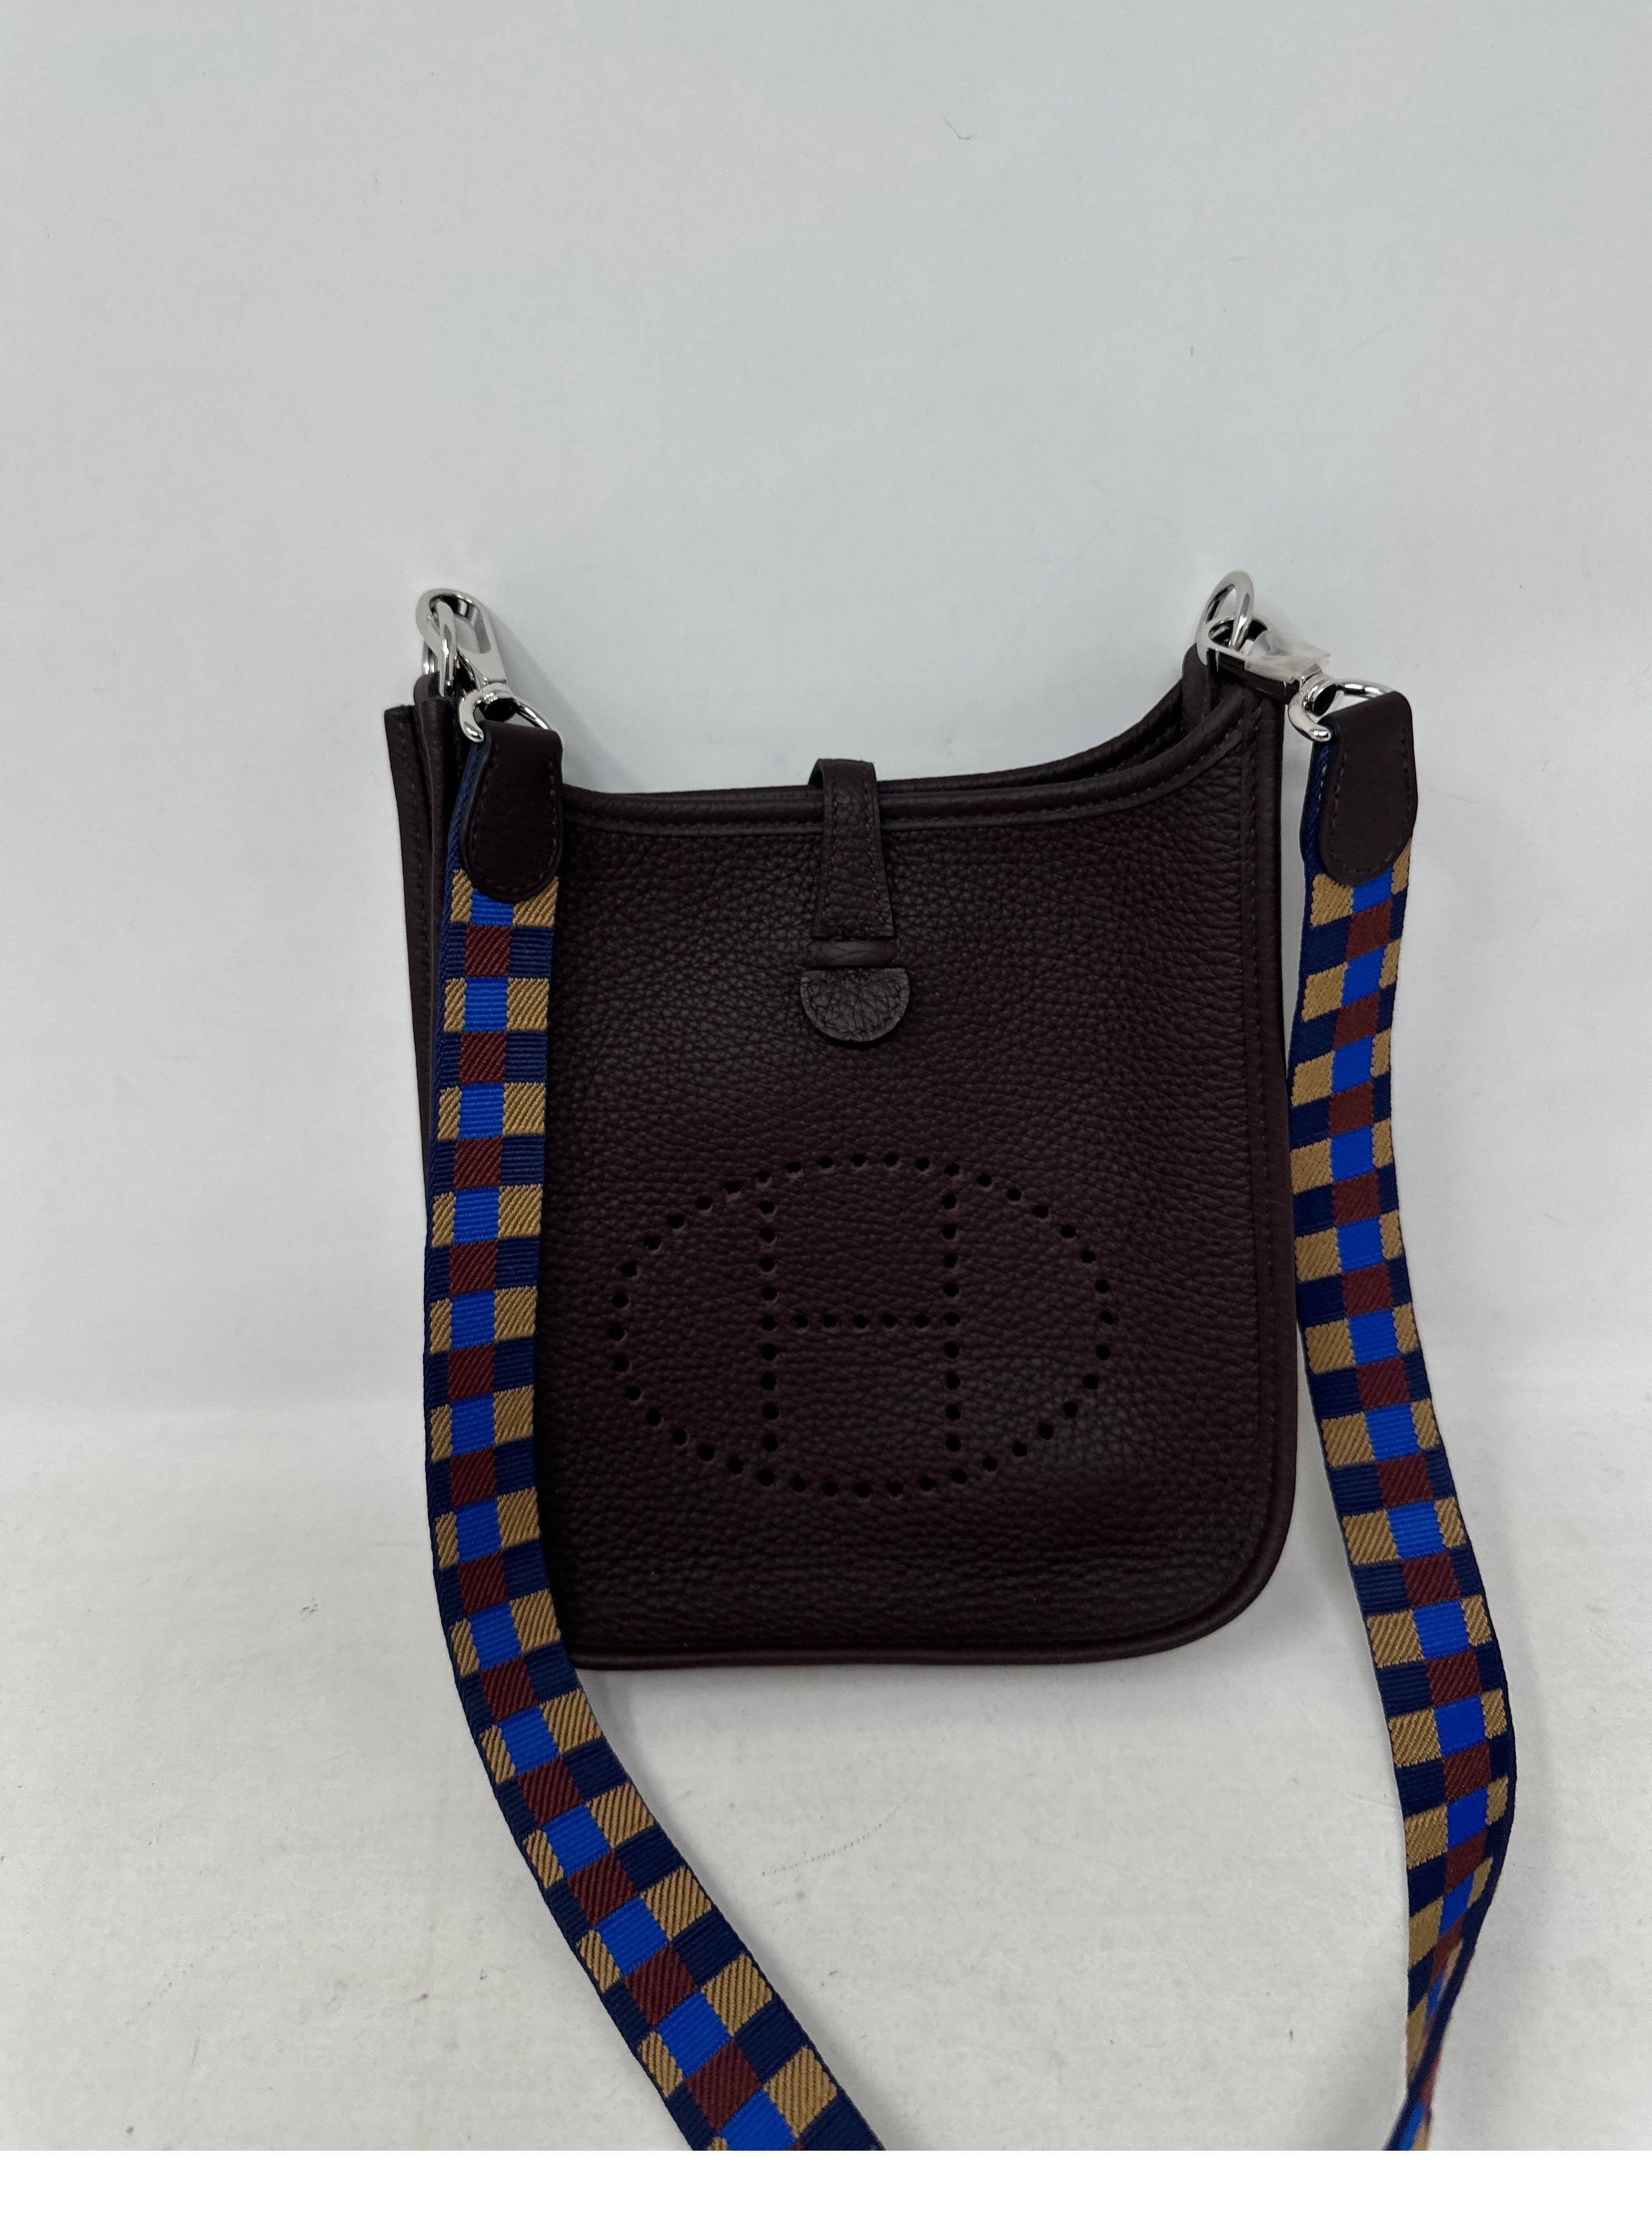 Hermes Dark Purple Evelyne TPM Bag. Excellent like new condition. Mini size Evelyne bag with rare unique strap. Interior clean and mint. Includes multi color strap and dust bag. Guaranteed authentic. 